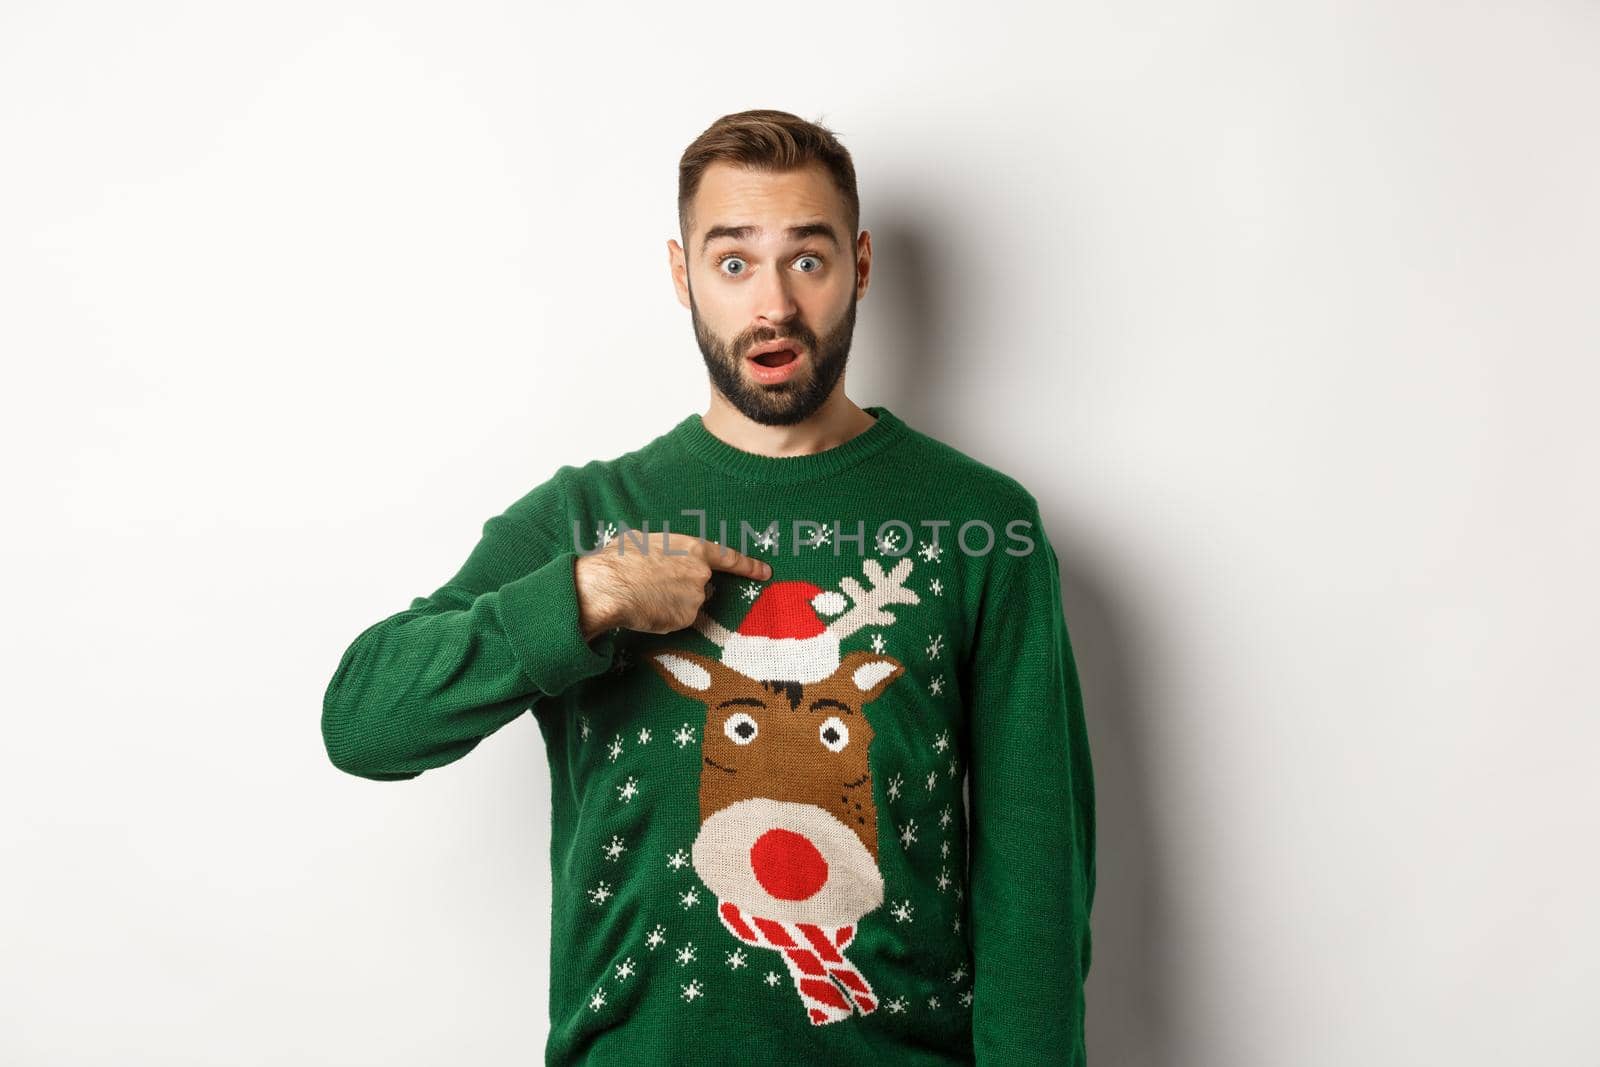 Winter holidays and christmas. Confused bearded guy pointing at himself, being startled with offer, standing over white background in sweater.